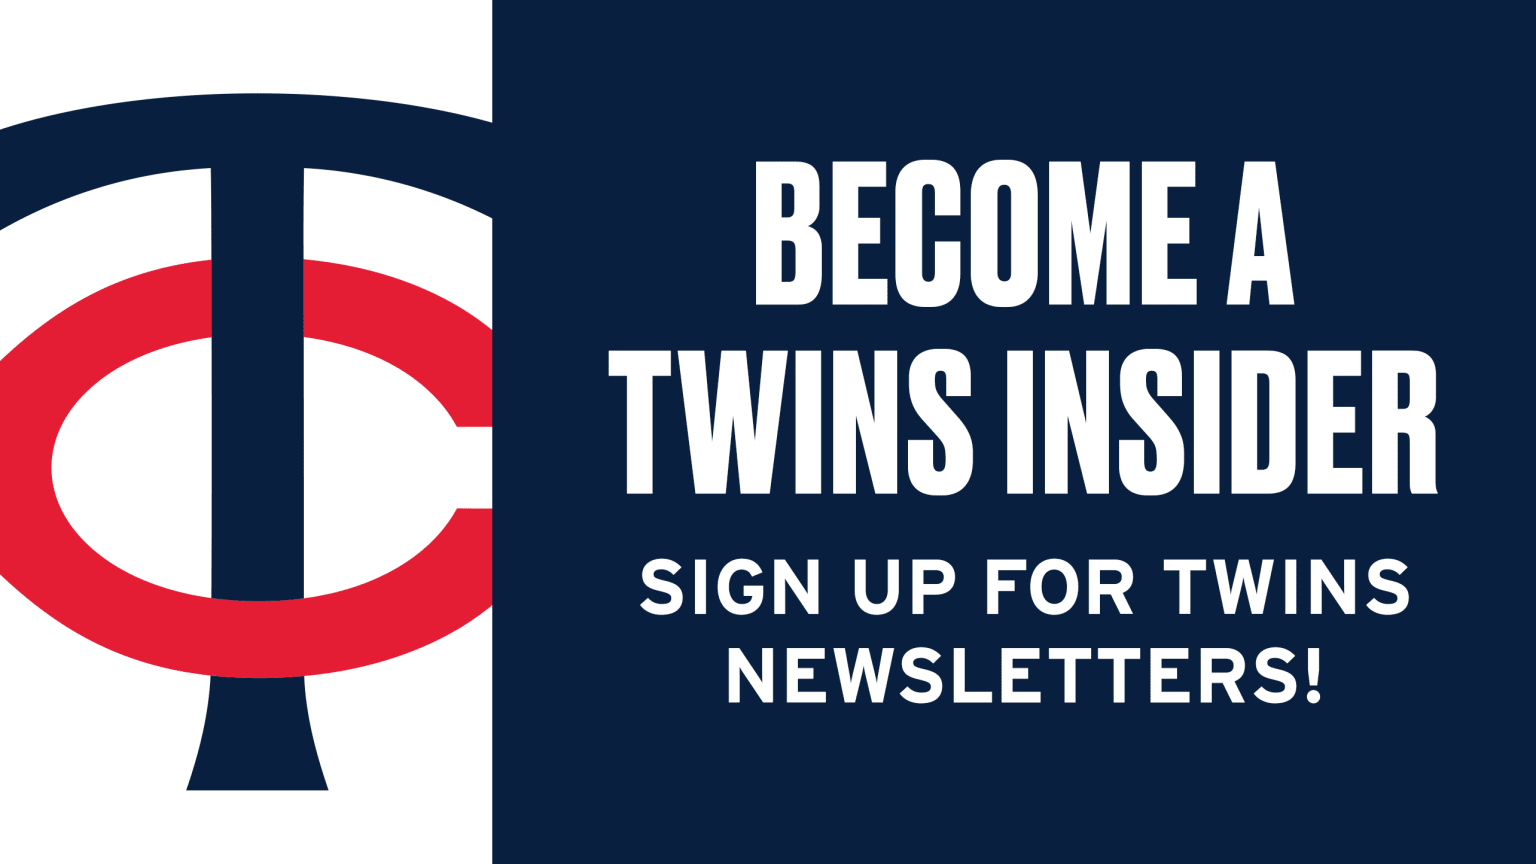 Minnesota Twins - Have you heard? The Ultimate Twins Experience is back and  is happening now! You won't want to miss this! Enter online   or text UltimateTwins to 73876 for a